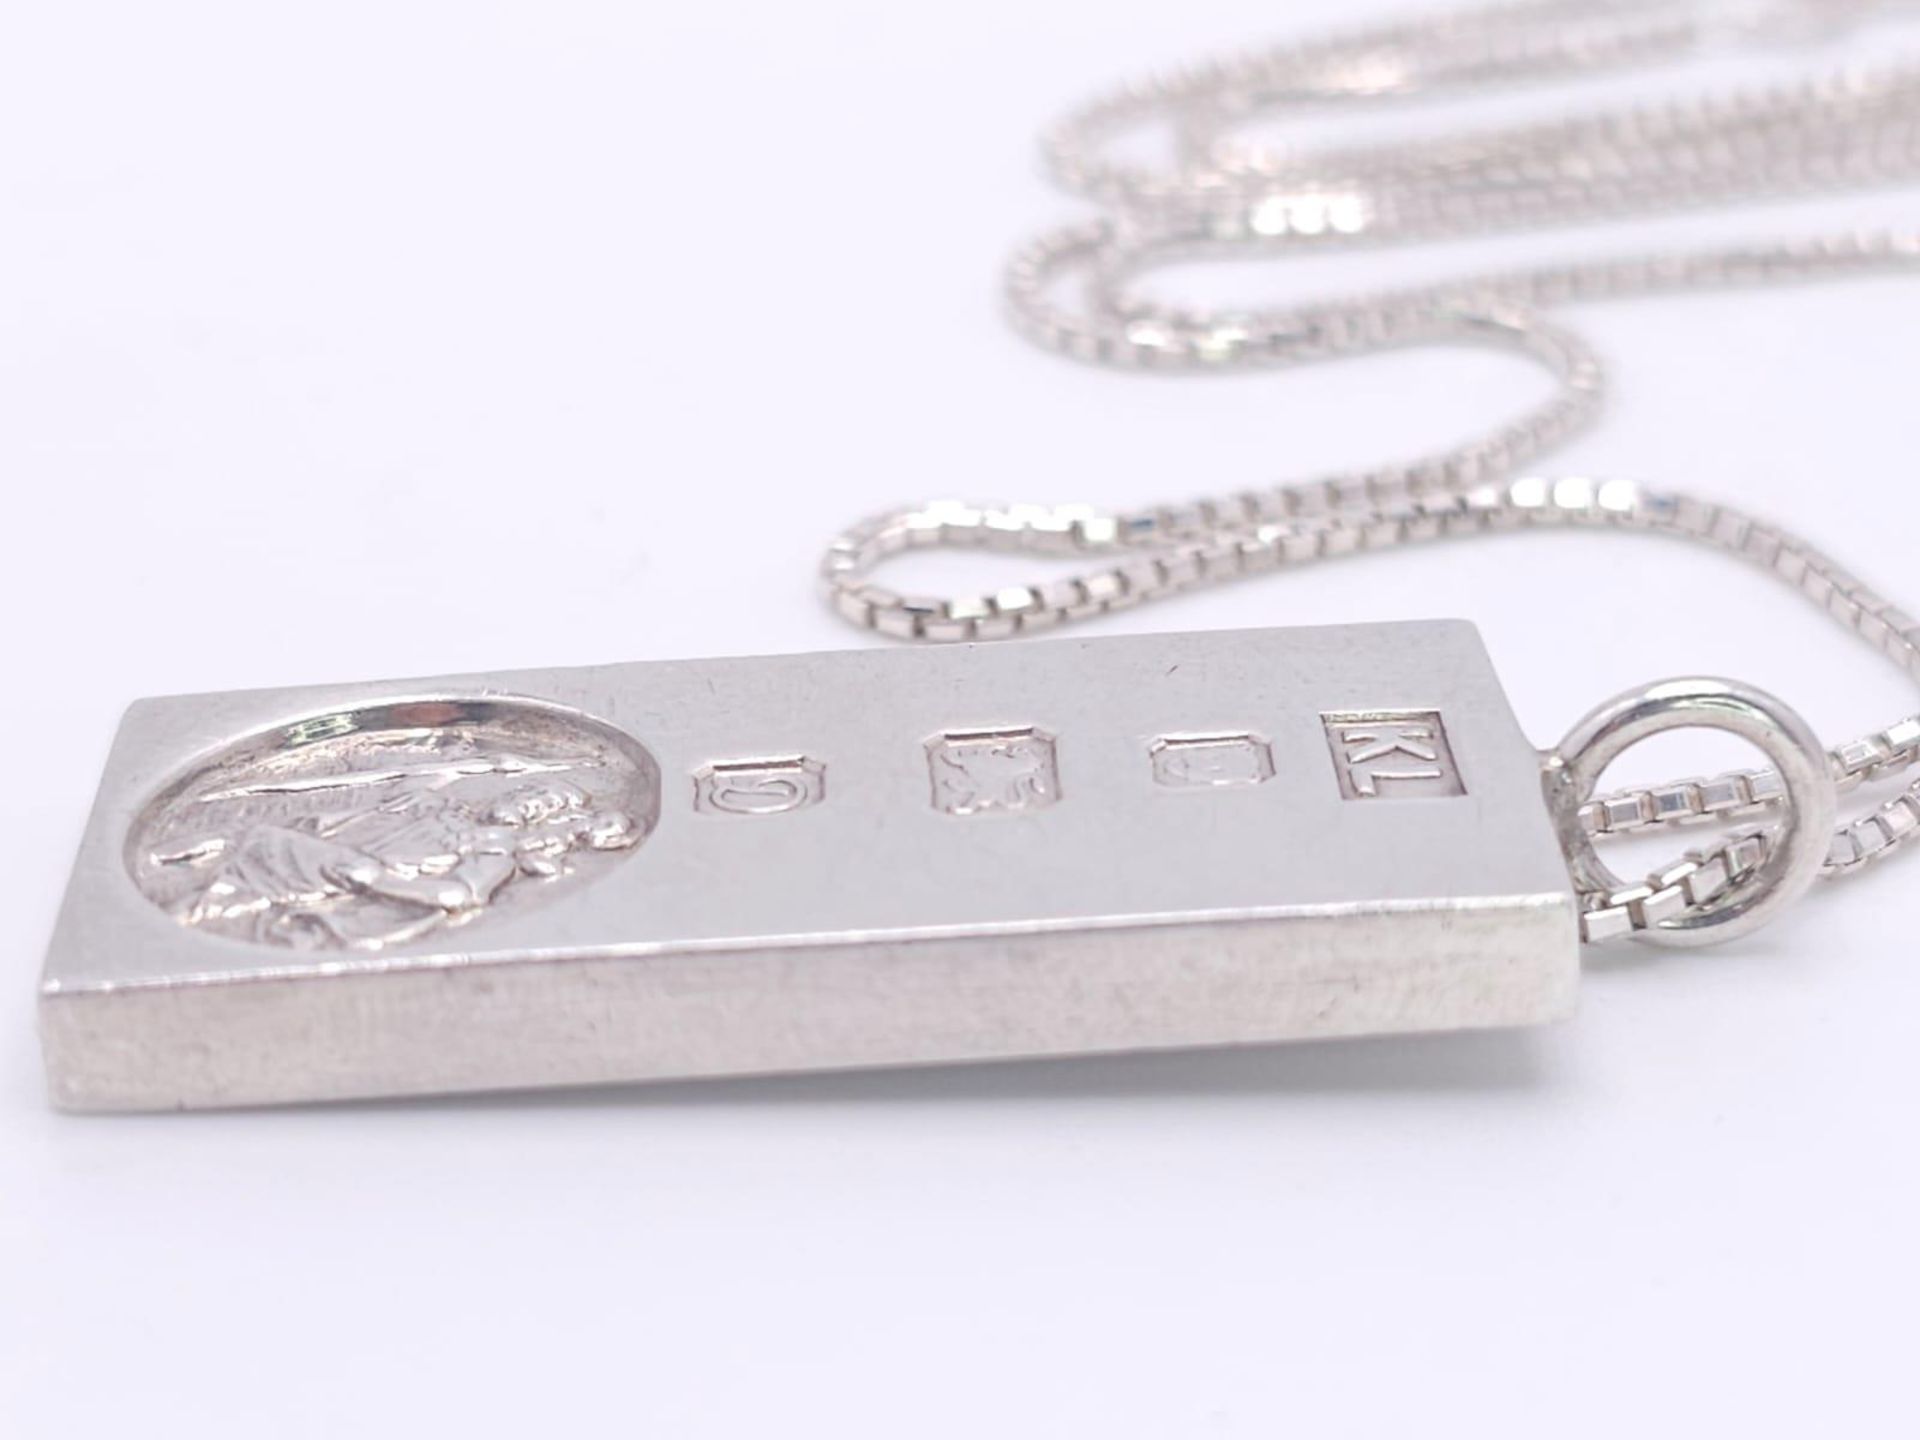 A Sterling Silver St. Christopher Ingot Pendant on a Silver Necklace. 5cm - pendant. 58cm necklace - Image 7 of 13